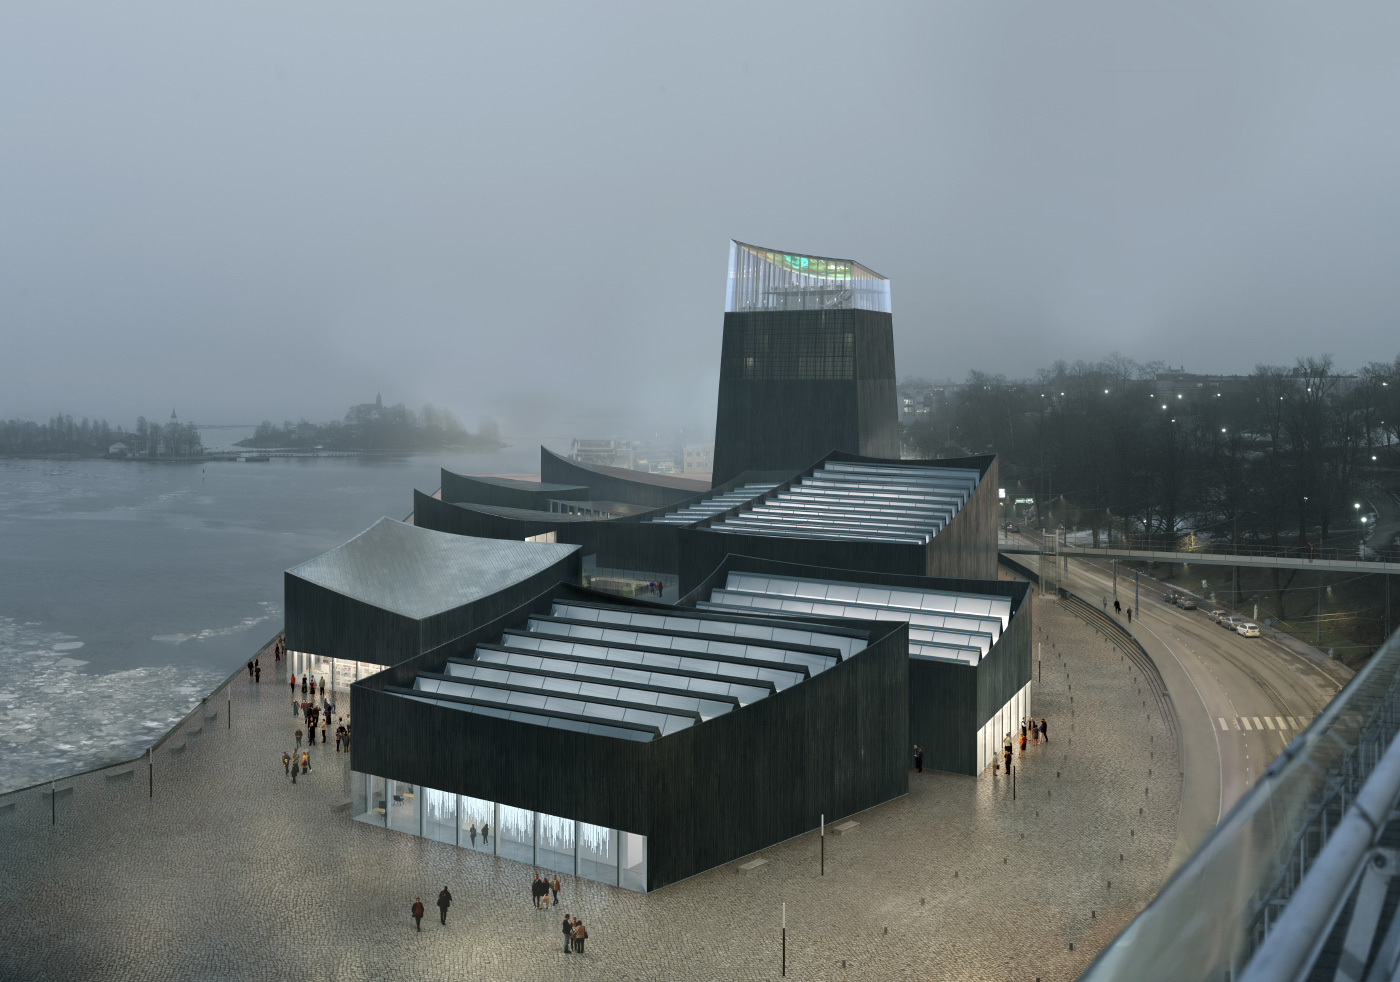 Rendering of the Guggenheim Helsinki, a black, squat museum, which won the architectural design competition